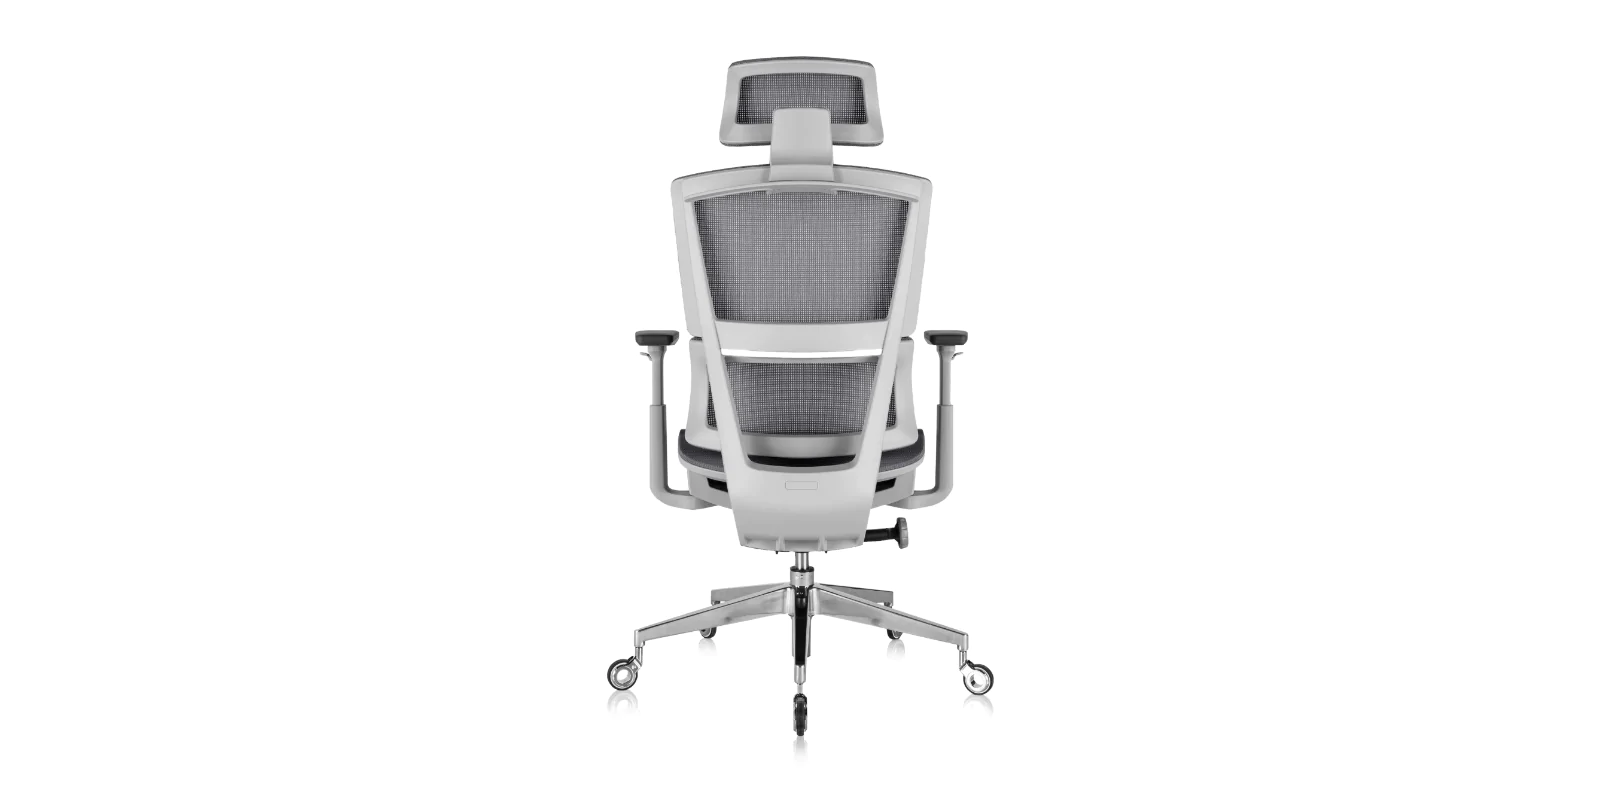 What is the best orthopedic office chair?